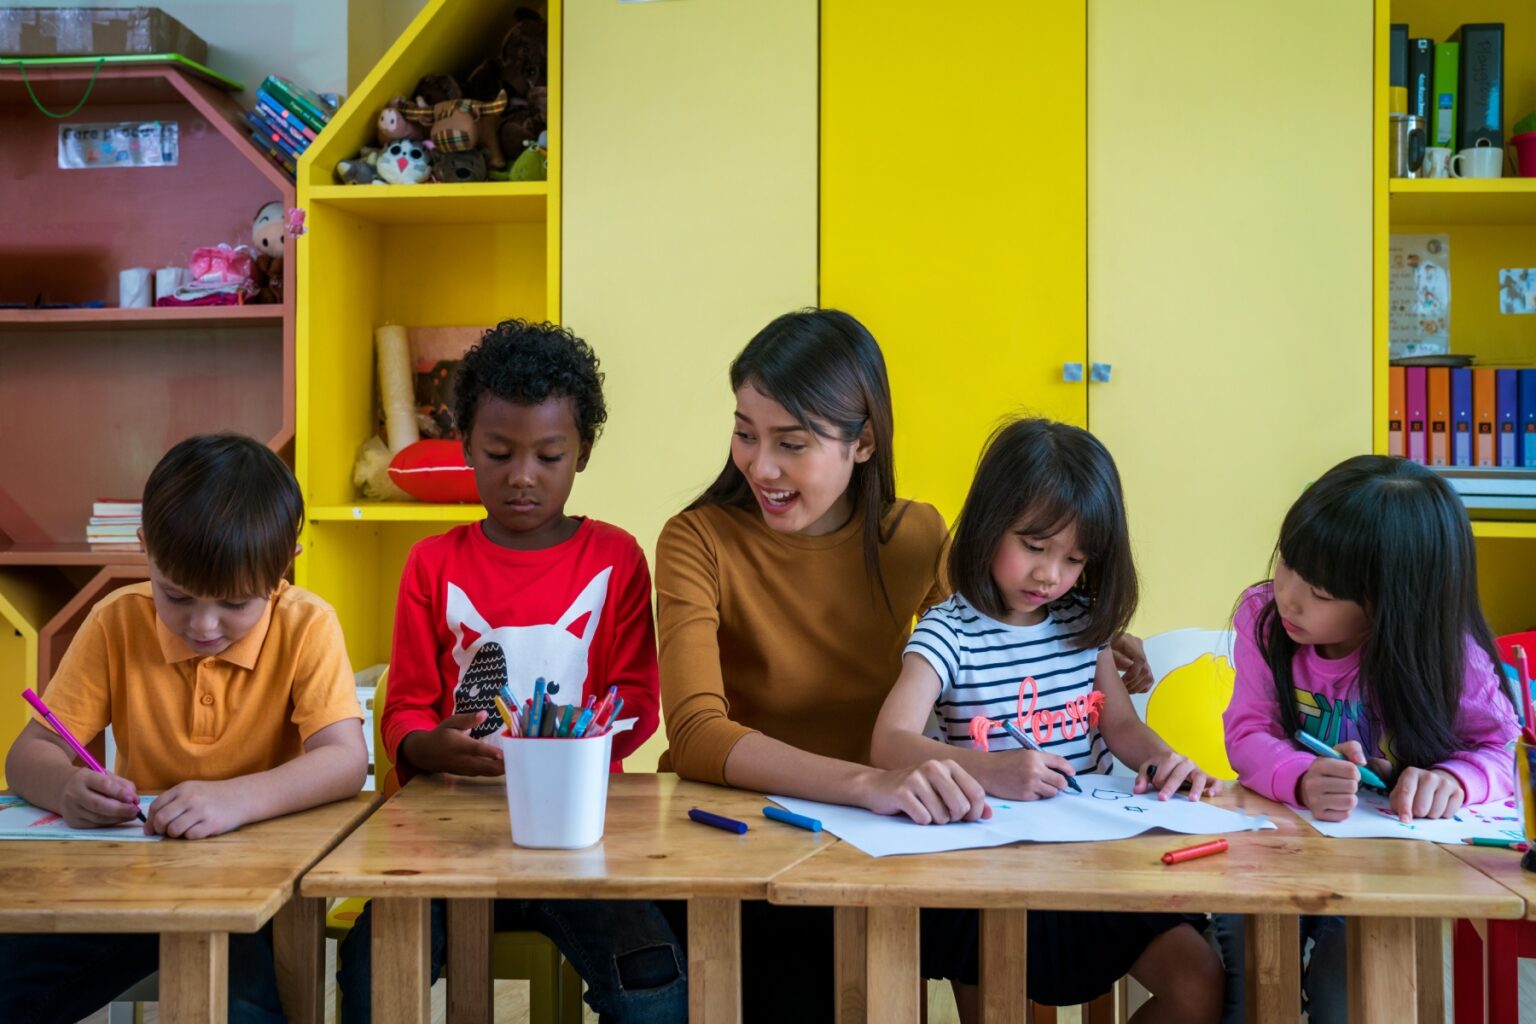 A teacher helps four young students of various ethnicities to color on paper in a brightly lit classroom